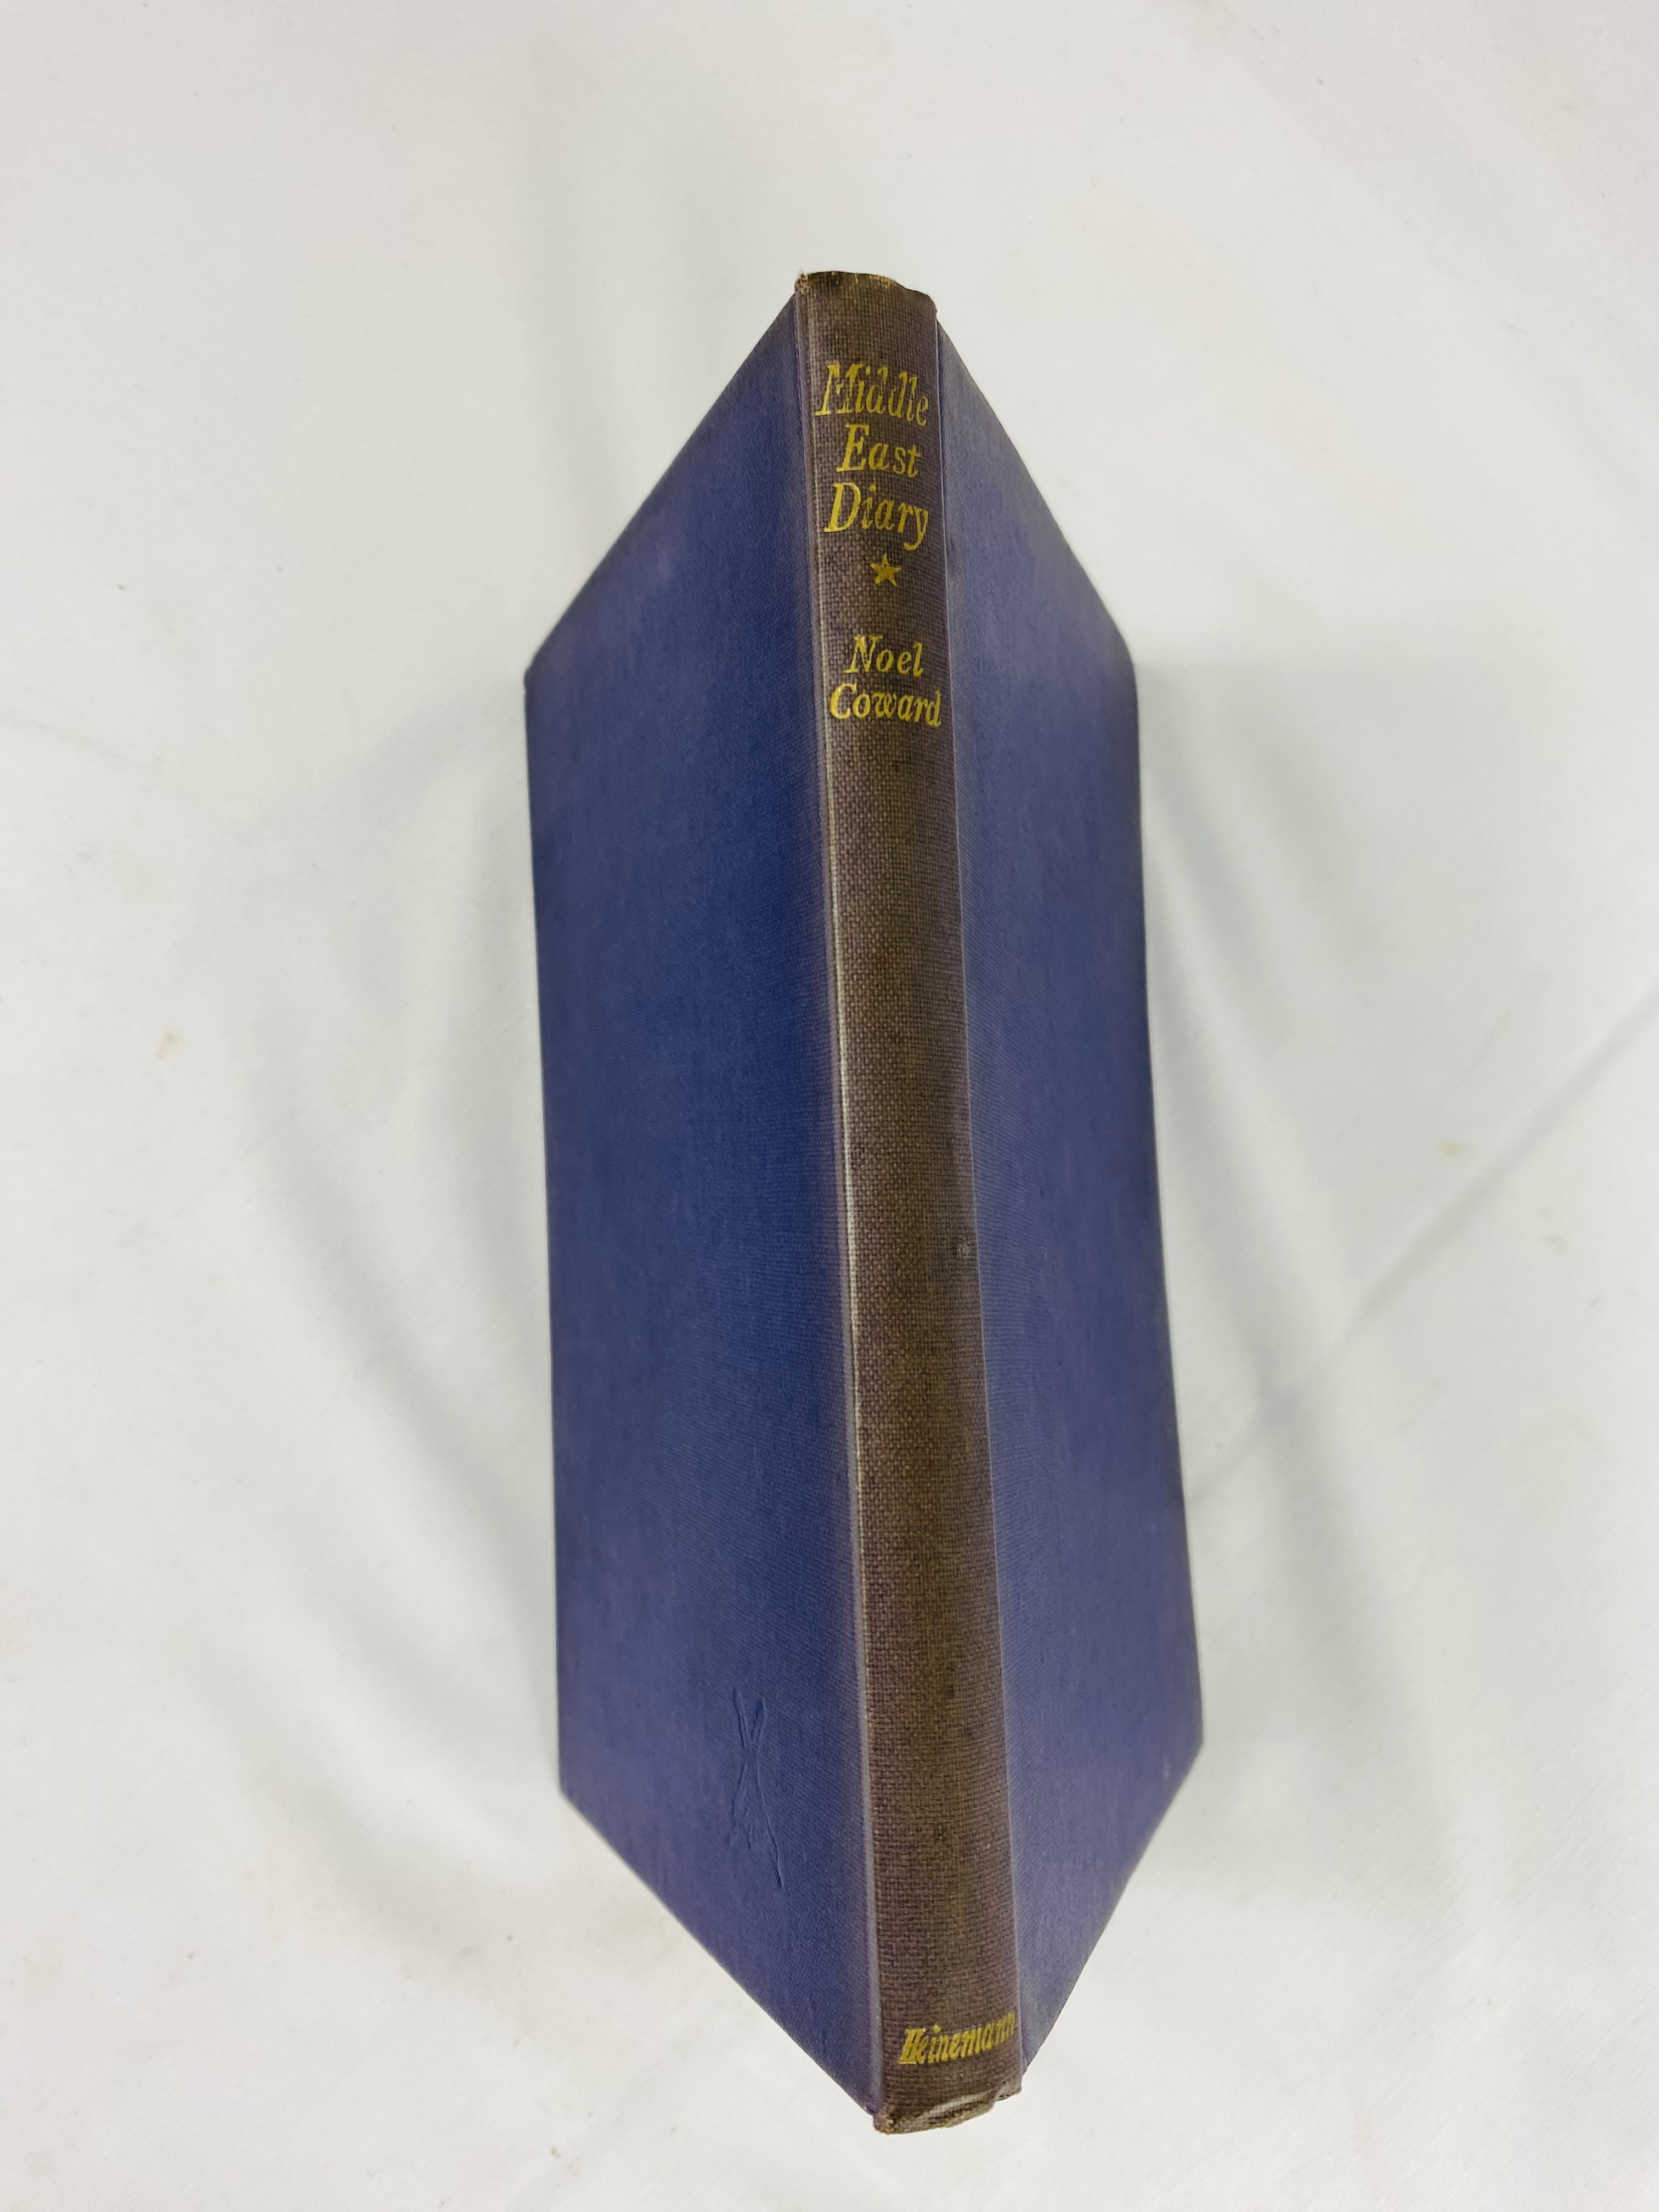 Noel Coward, Middle East Diary, first edition, William Heinemann Ltd, 1944 - Image 3 of 7